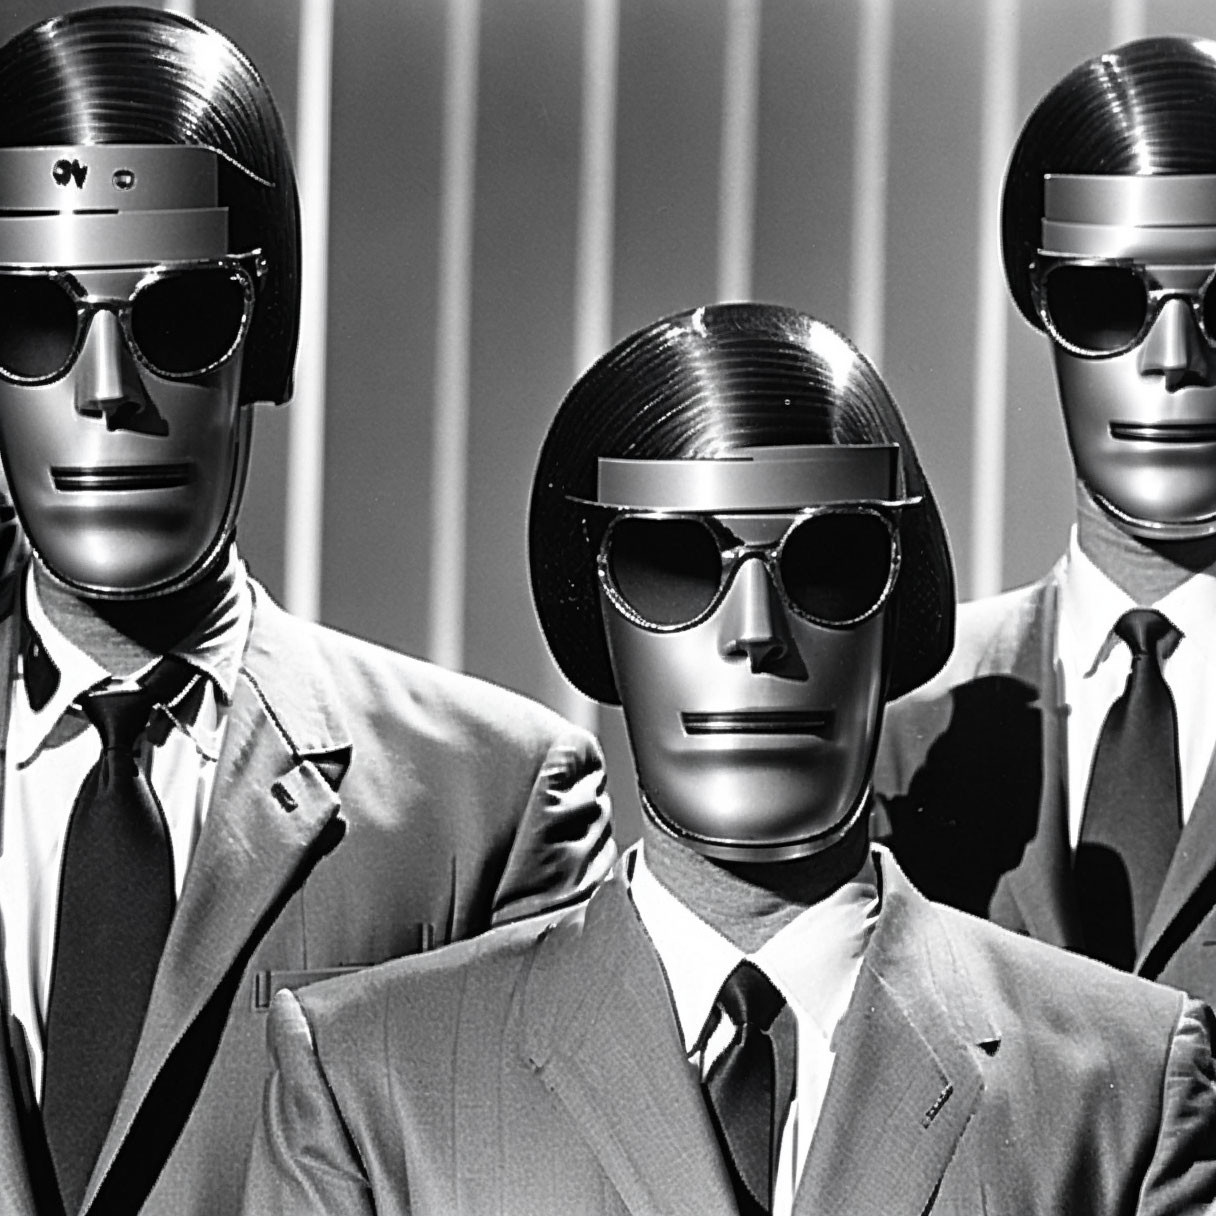 Three individuals in metallic masks and suits against striped background